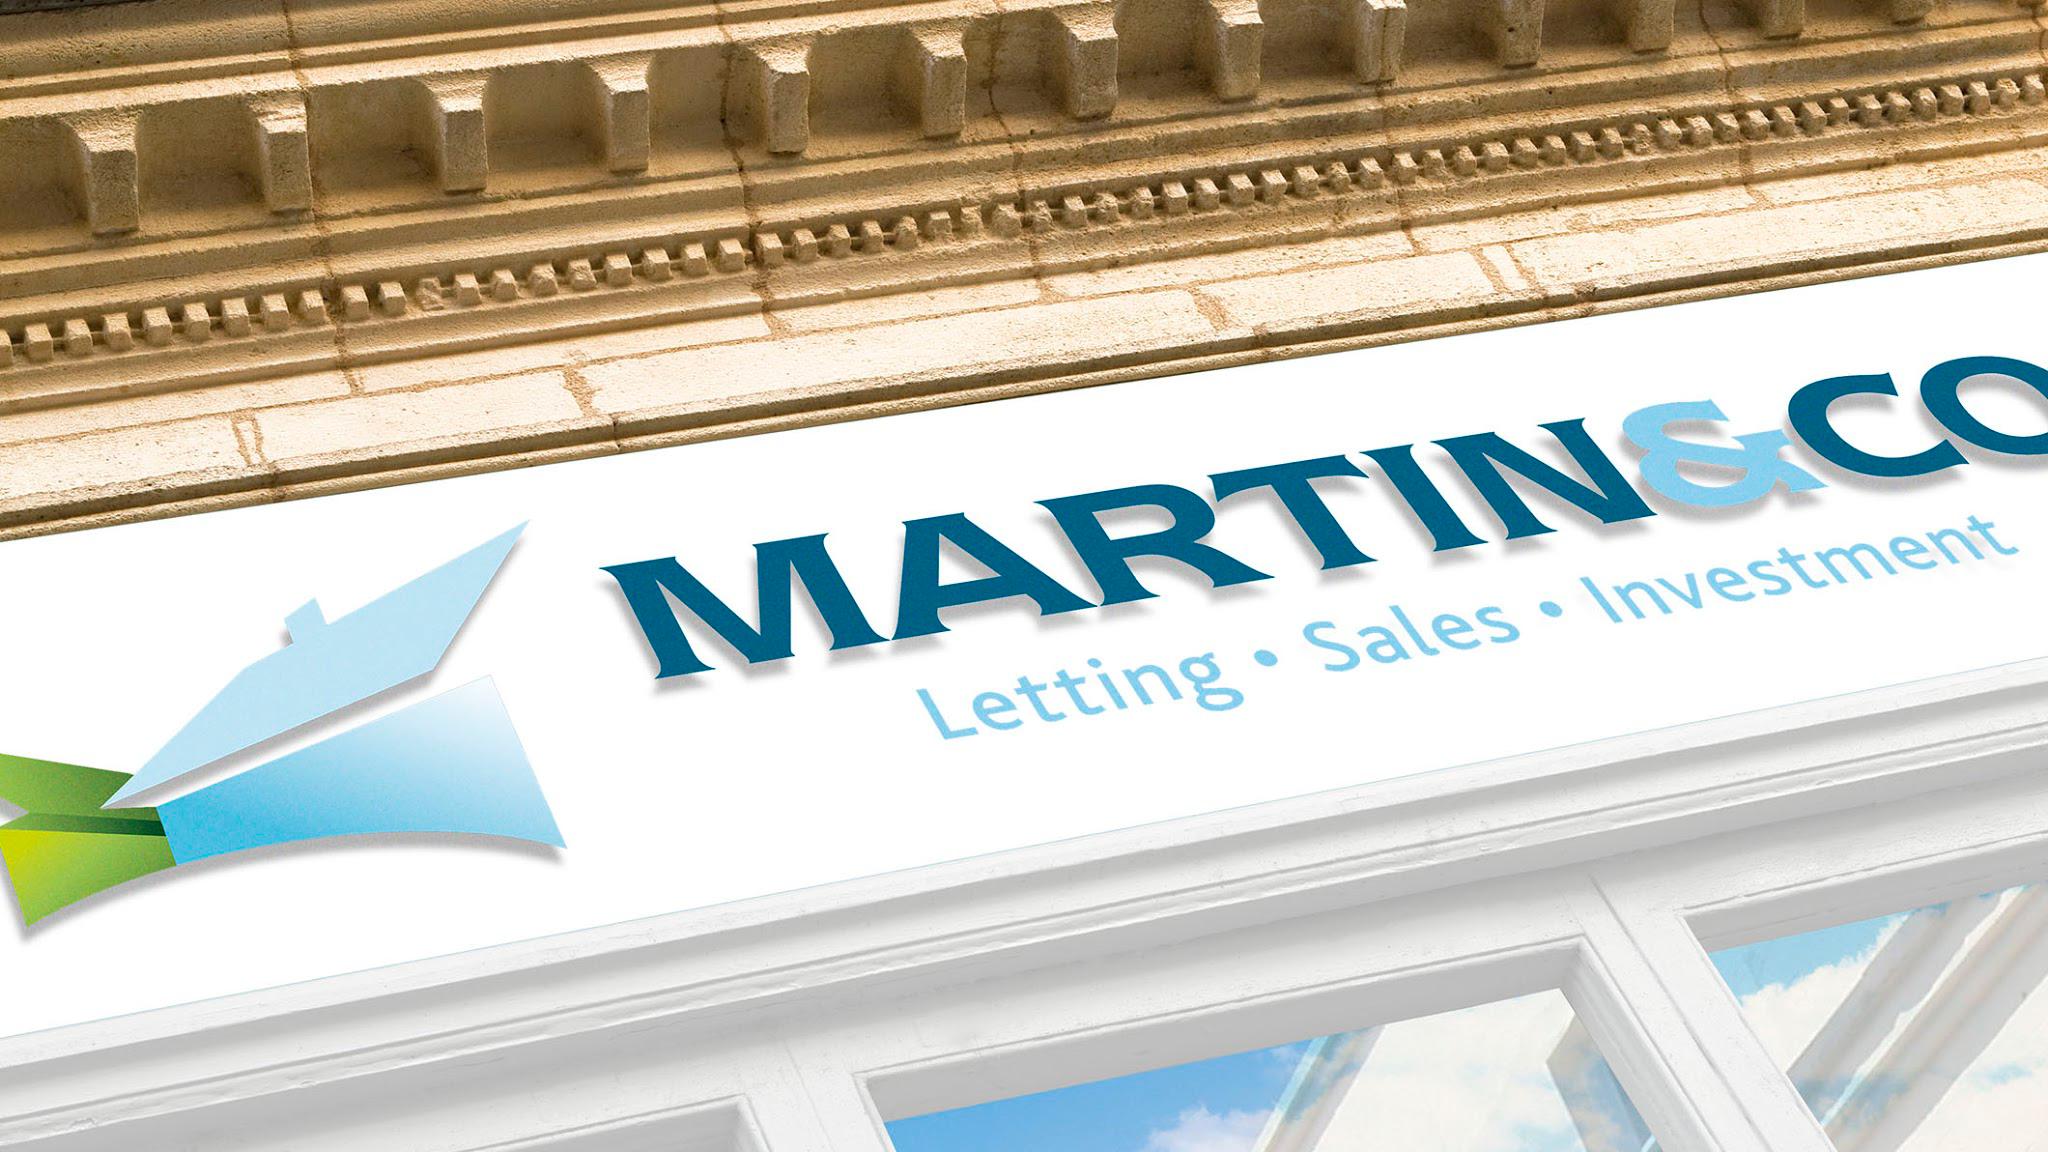 Martin & Co Reading Lettings & Estate Agents Reading 01189 312179